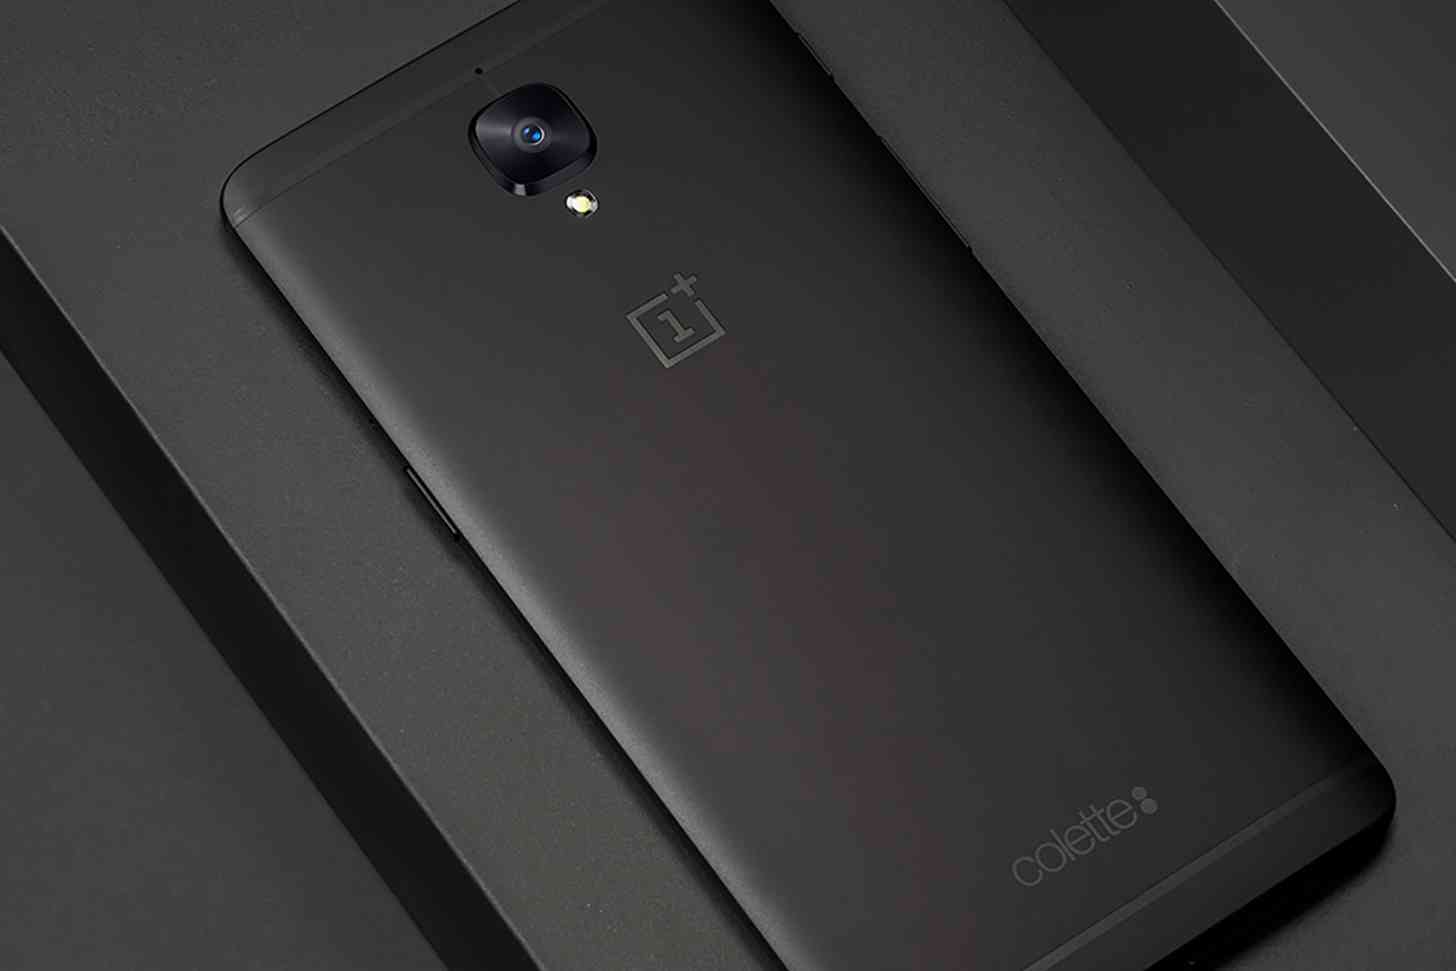 OnePlus 3T colette edition all-black rear